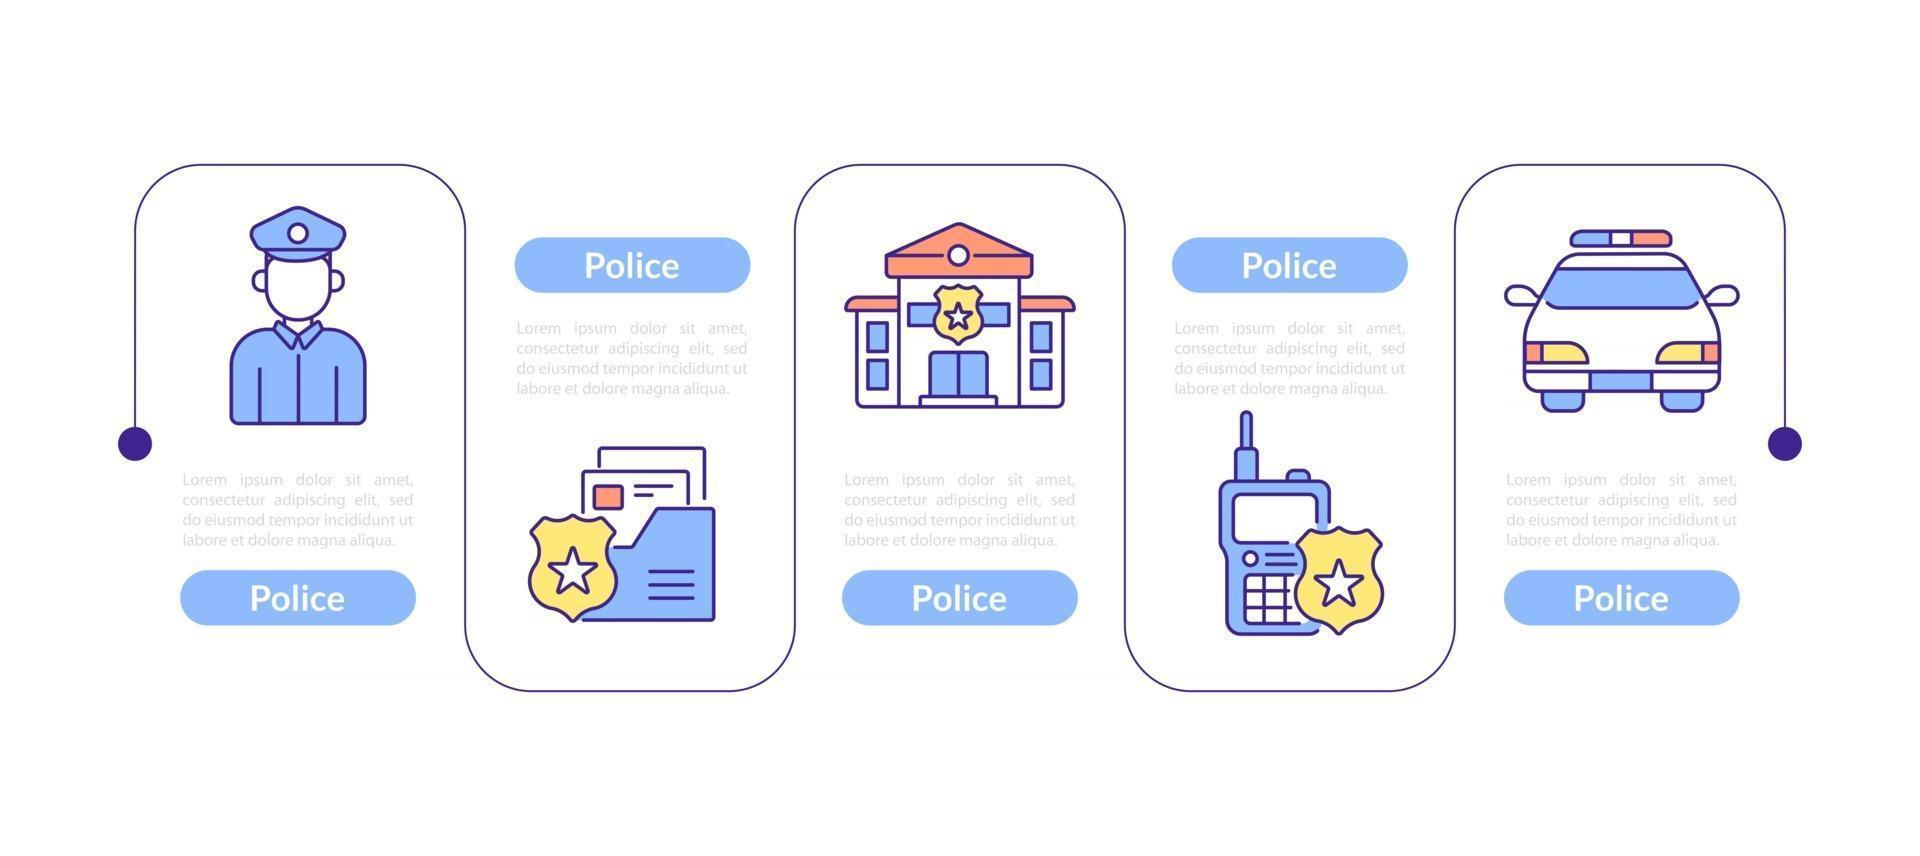 Police Vector infographic template with icons